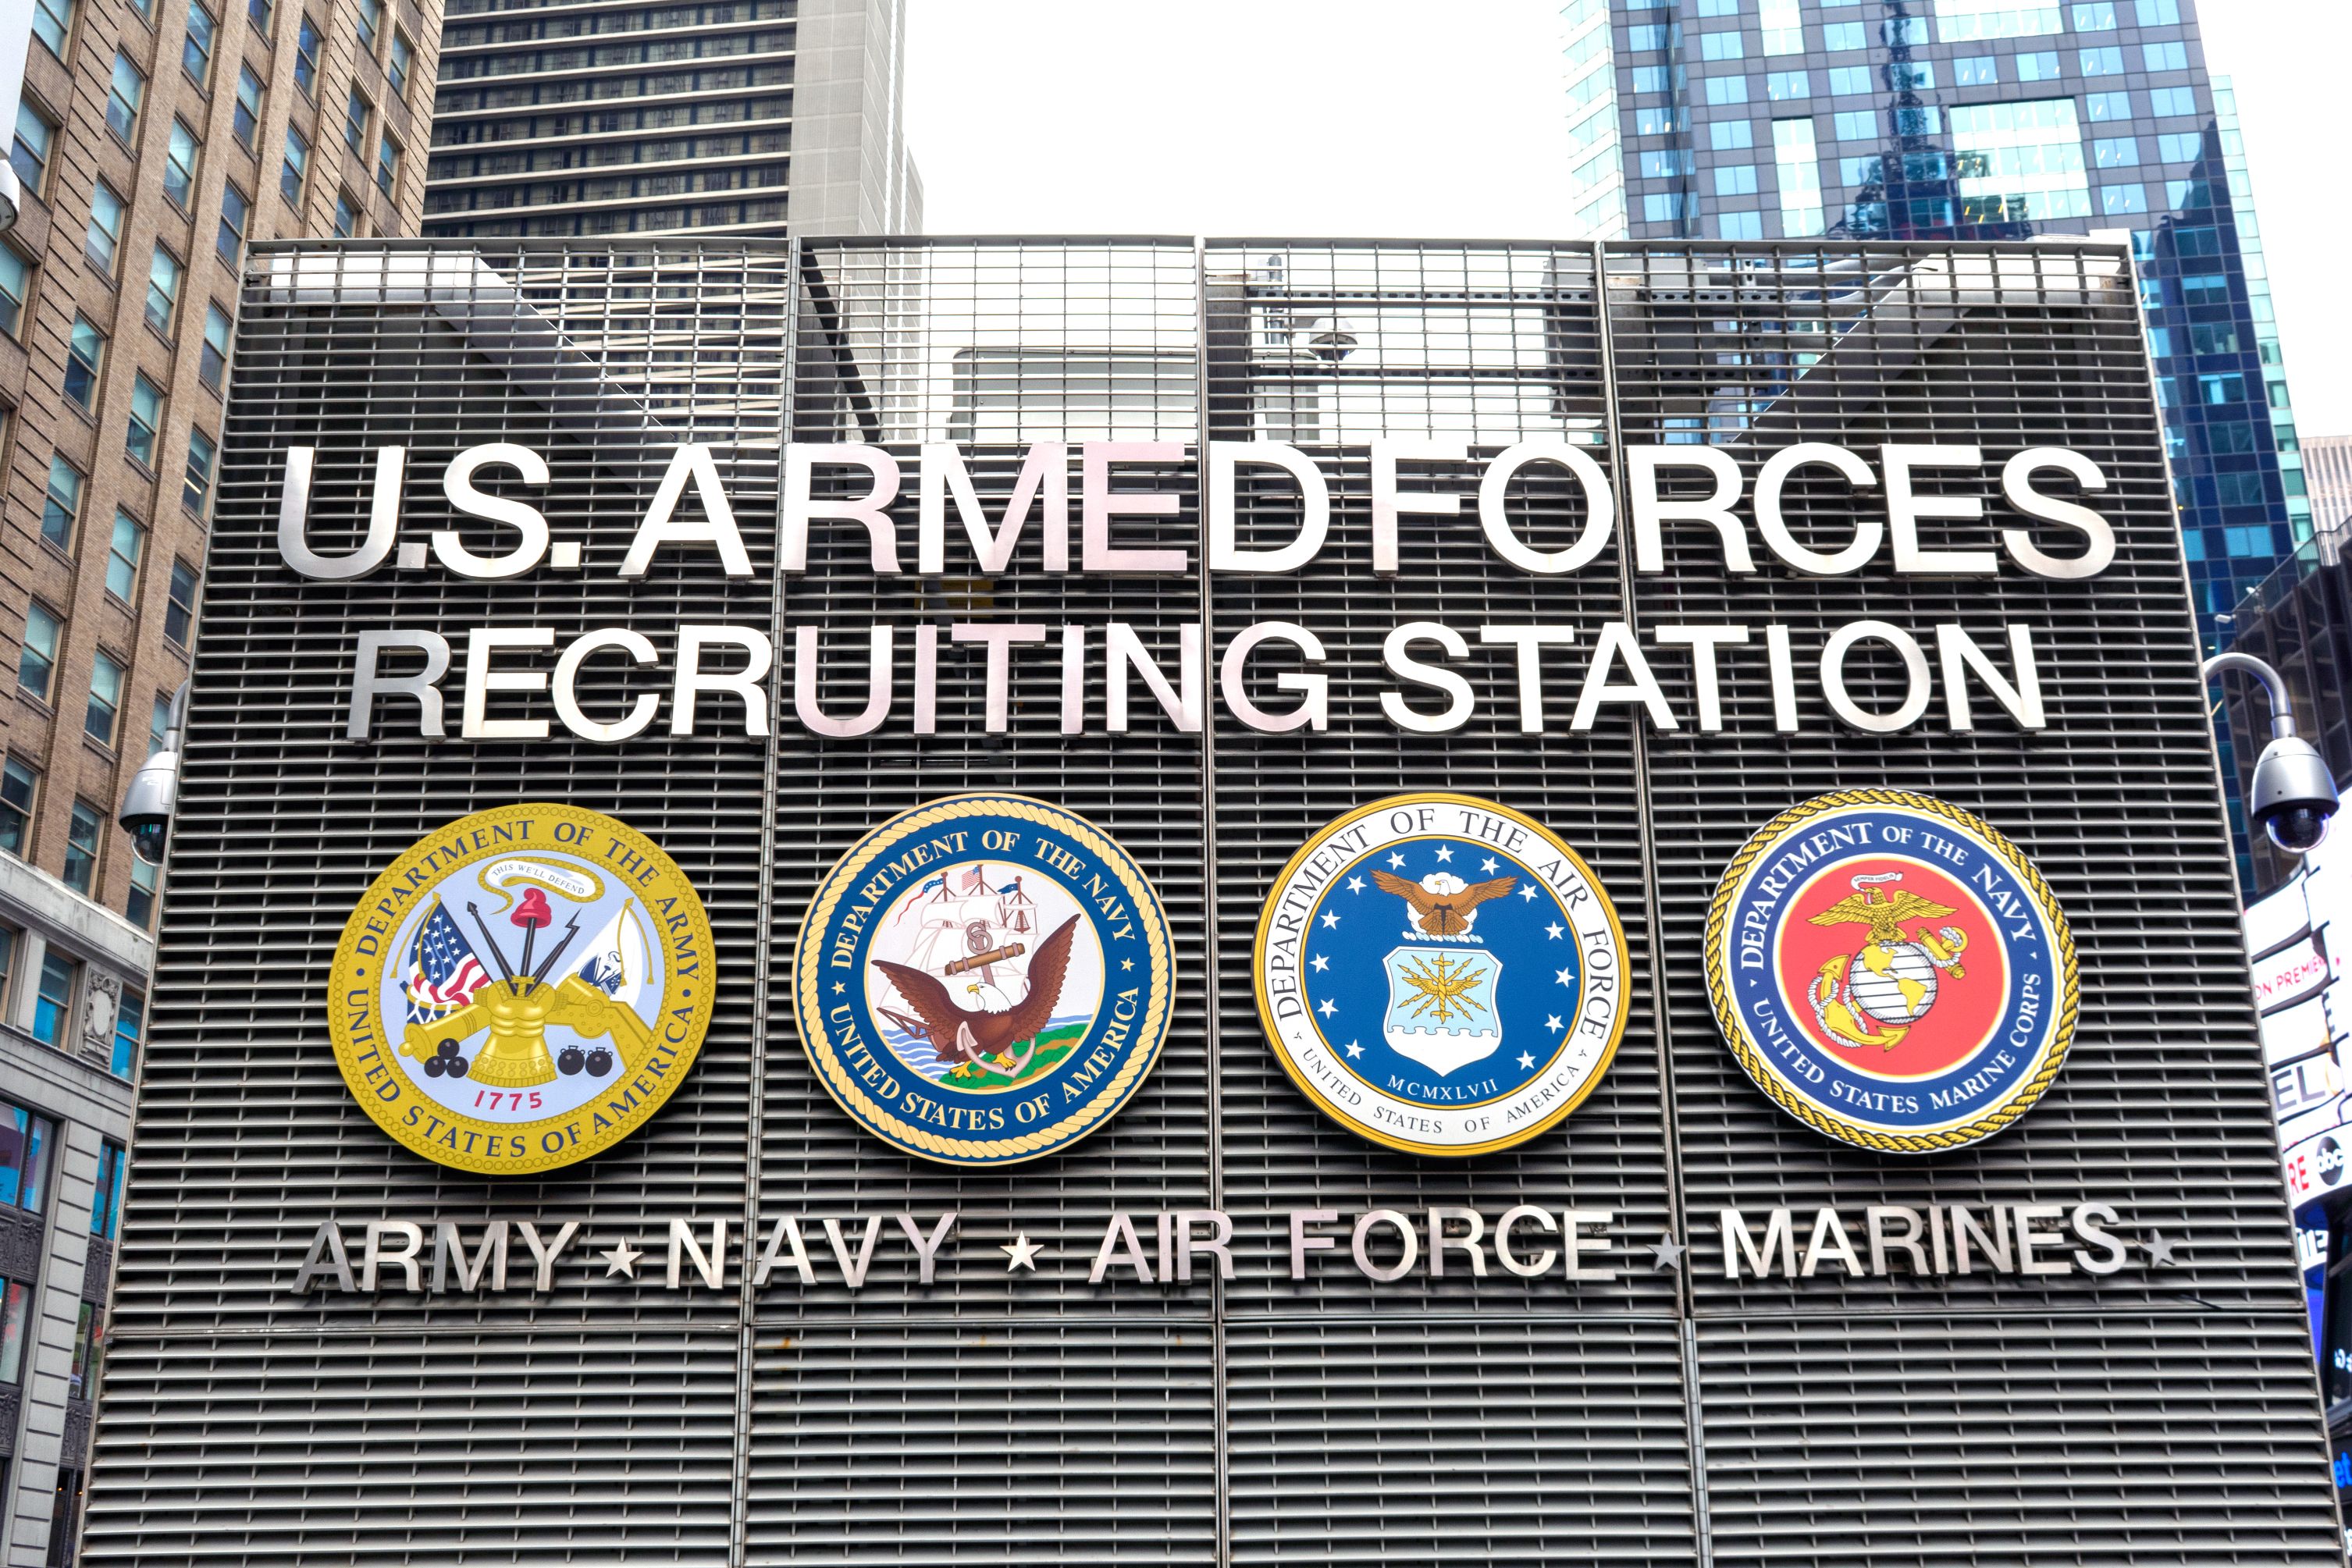 U.S. Armed Forces Recruiting Station sign at Times Square station that recruits for the four branches of the U.S. Armed Forces Army, Navy, Air Force and Marines - New York, USA - 2021